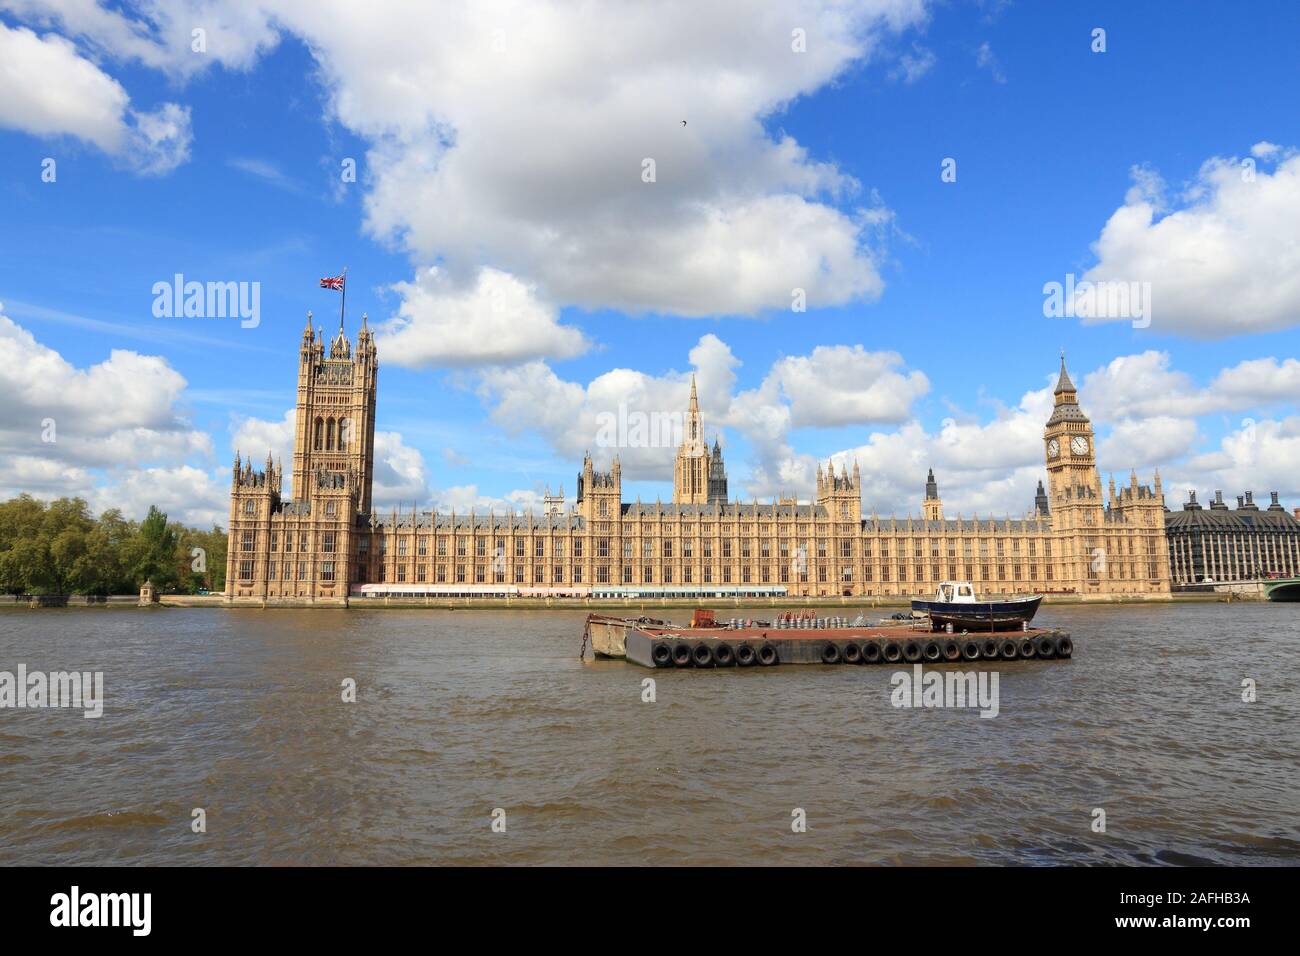 London UK - Palace of Westminster (Houses of Parliament). UNESCO World Heritage Site. Stock Photo